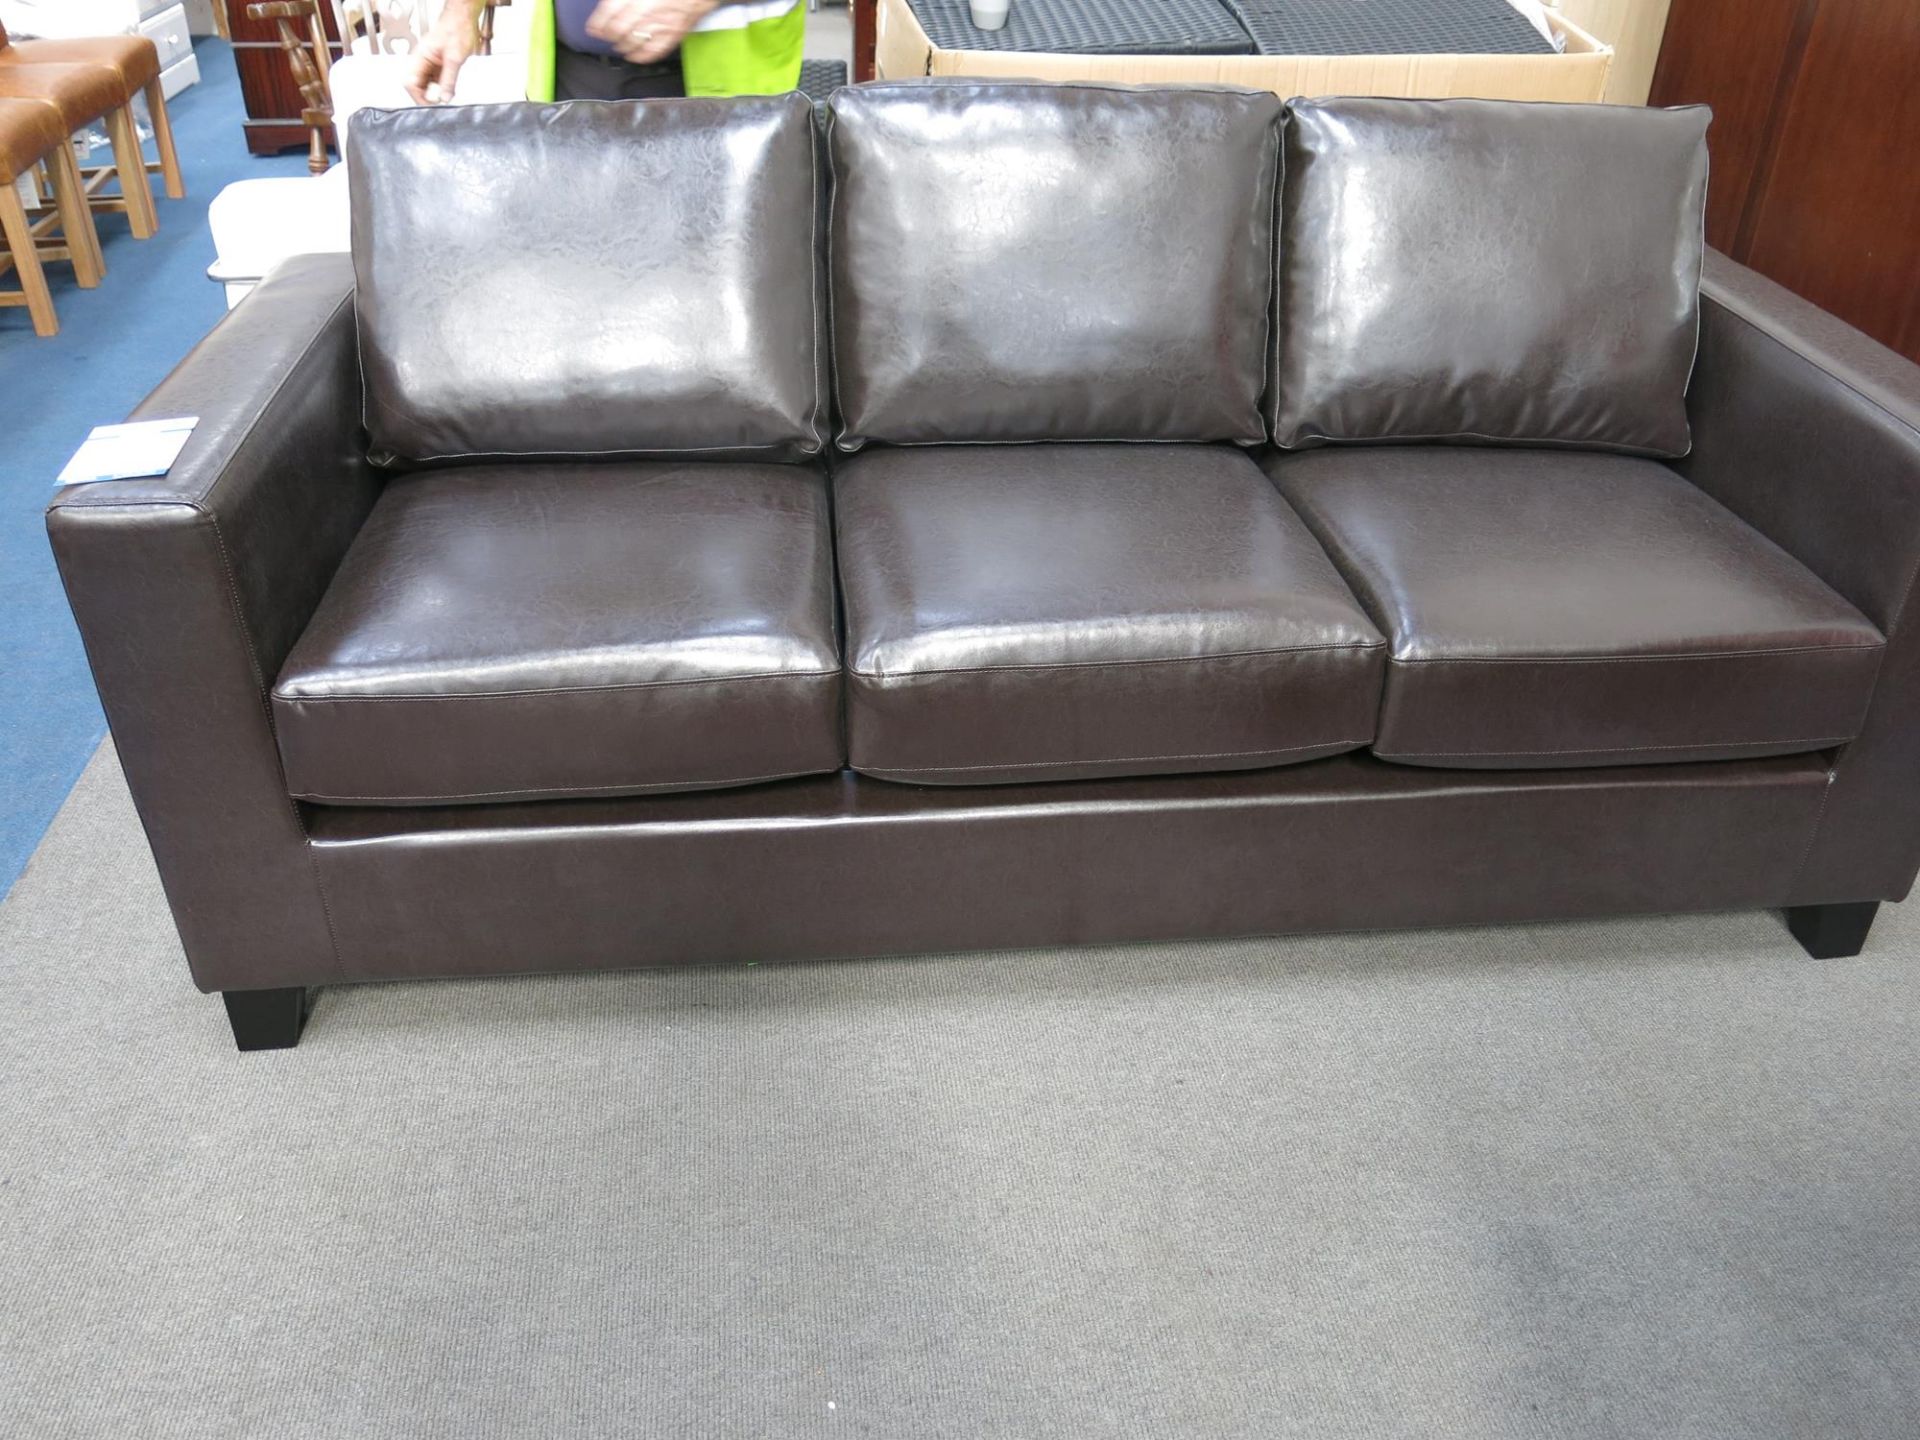 * An as new three seater sofa. The faux pu leather upholstery is brown in colour. Please note